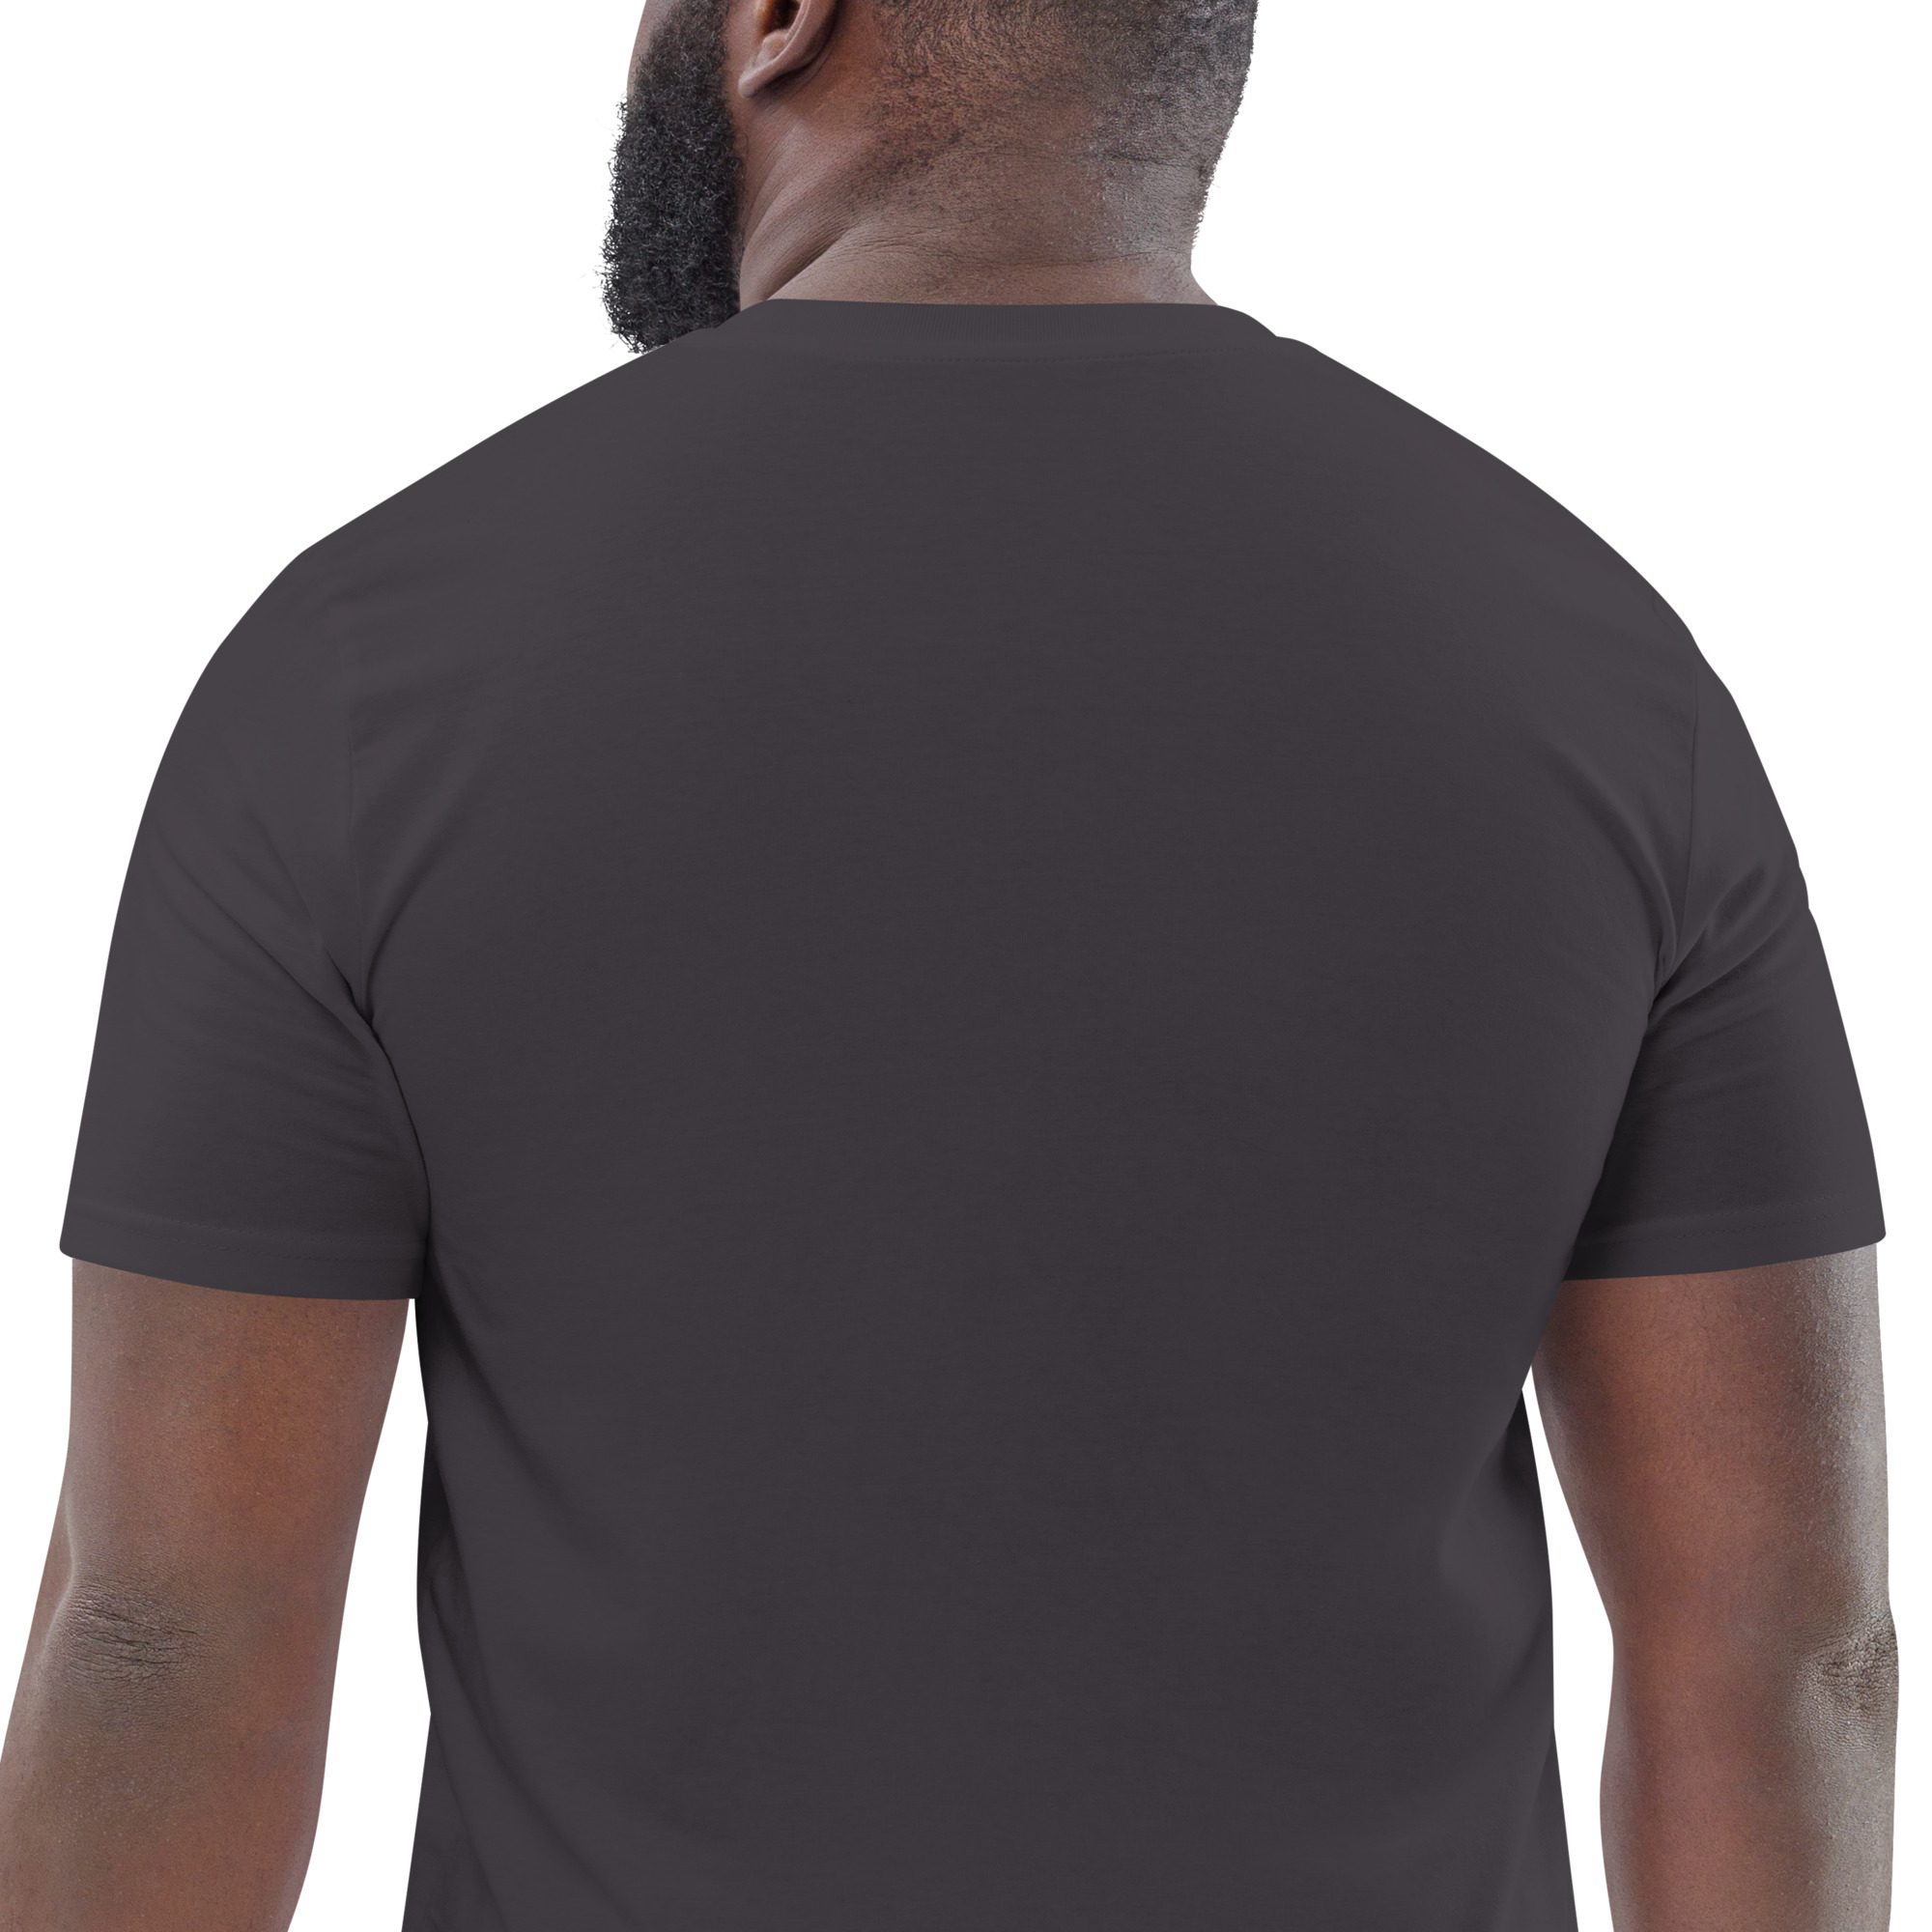 unisex organic cotton t shirt anthracite zoomed in 651ada938fa56